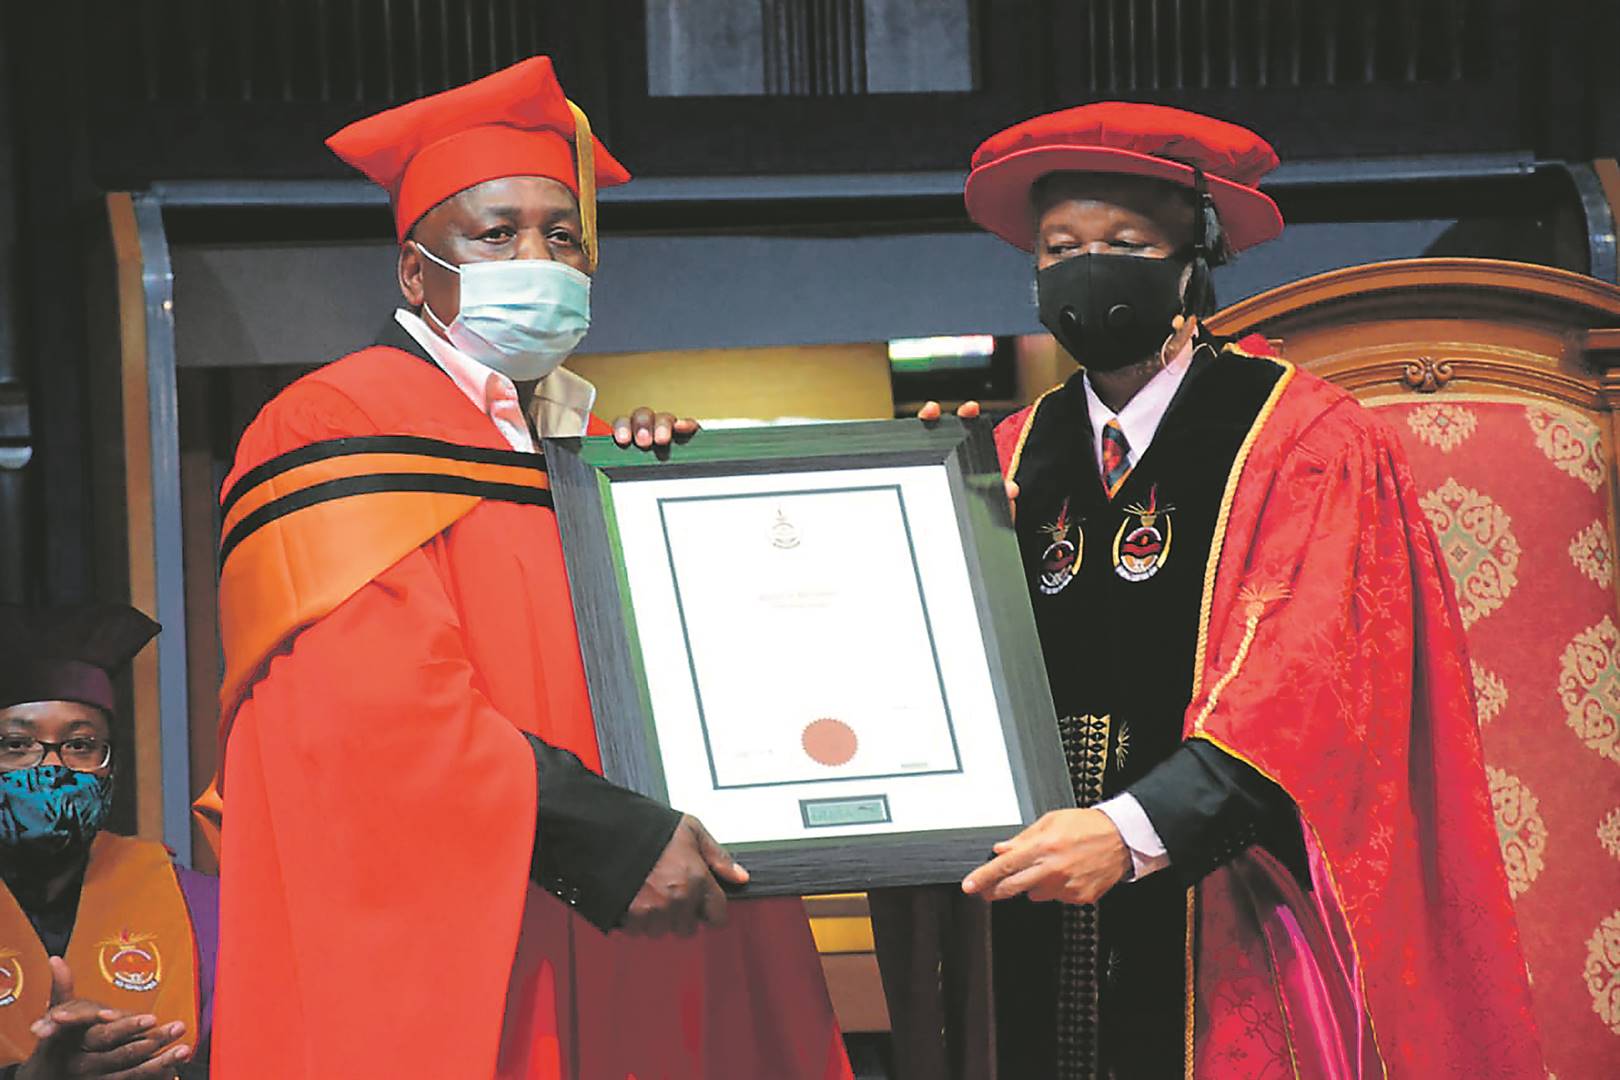 Moses Ngwenya (left) of the legendary group Soul Brothers received his honorary doctorate from Unisa Vice-Chancellor Professor Mandla Makhanya.                  Photo by Raymond Morare